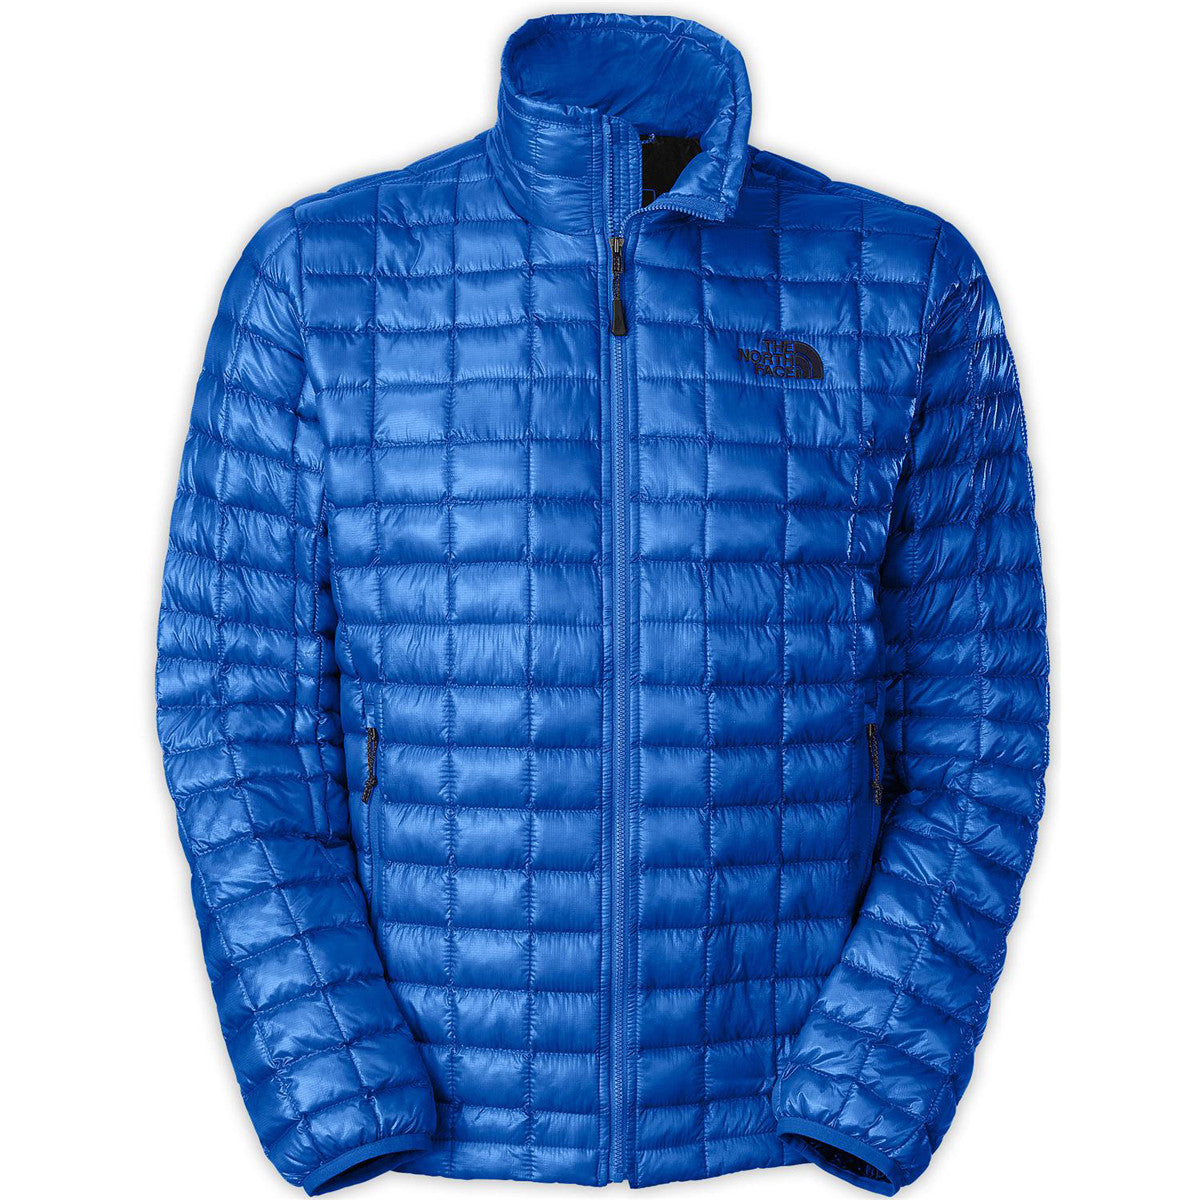 M's Thermoball Full Zip